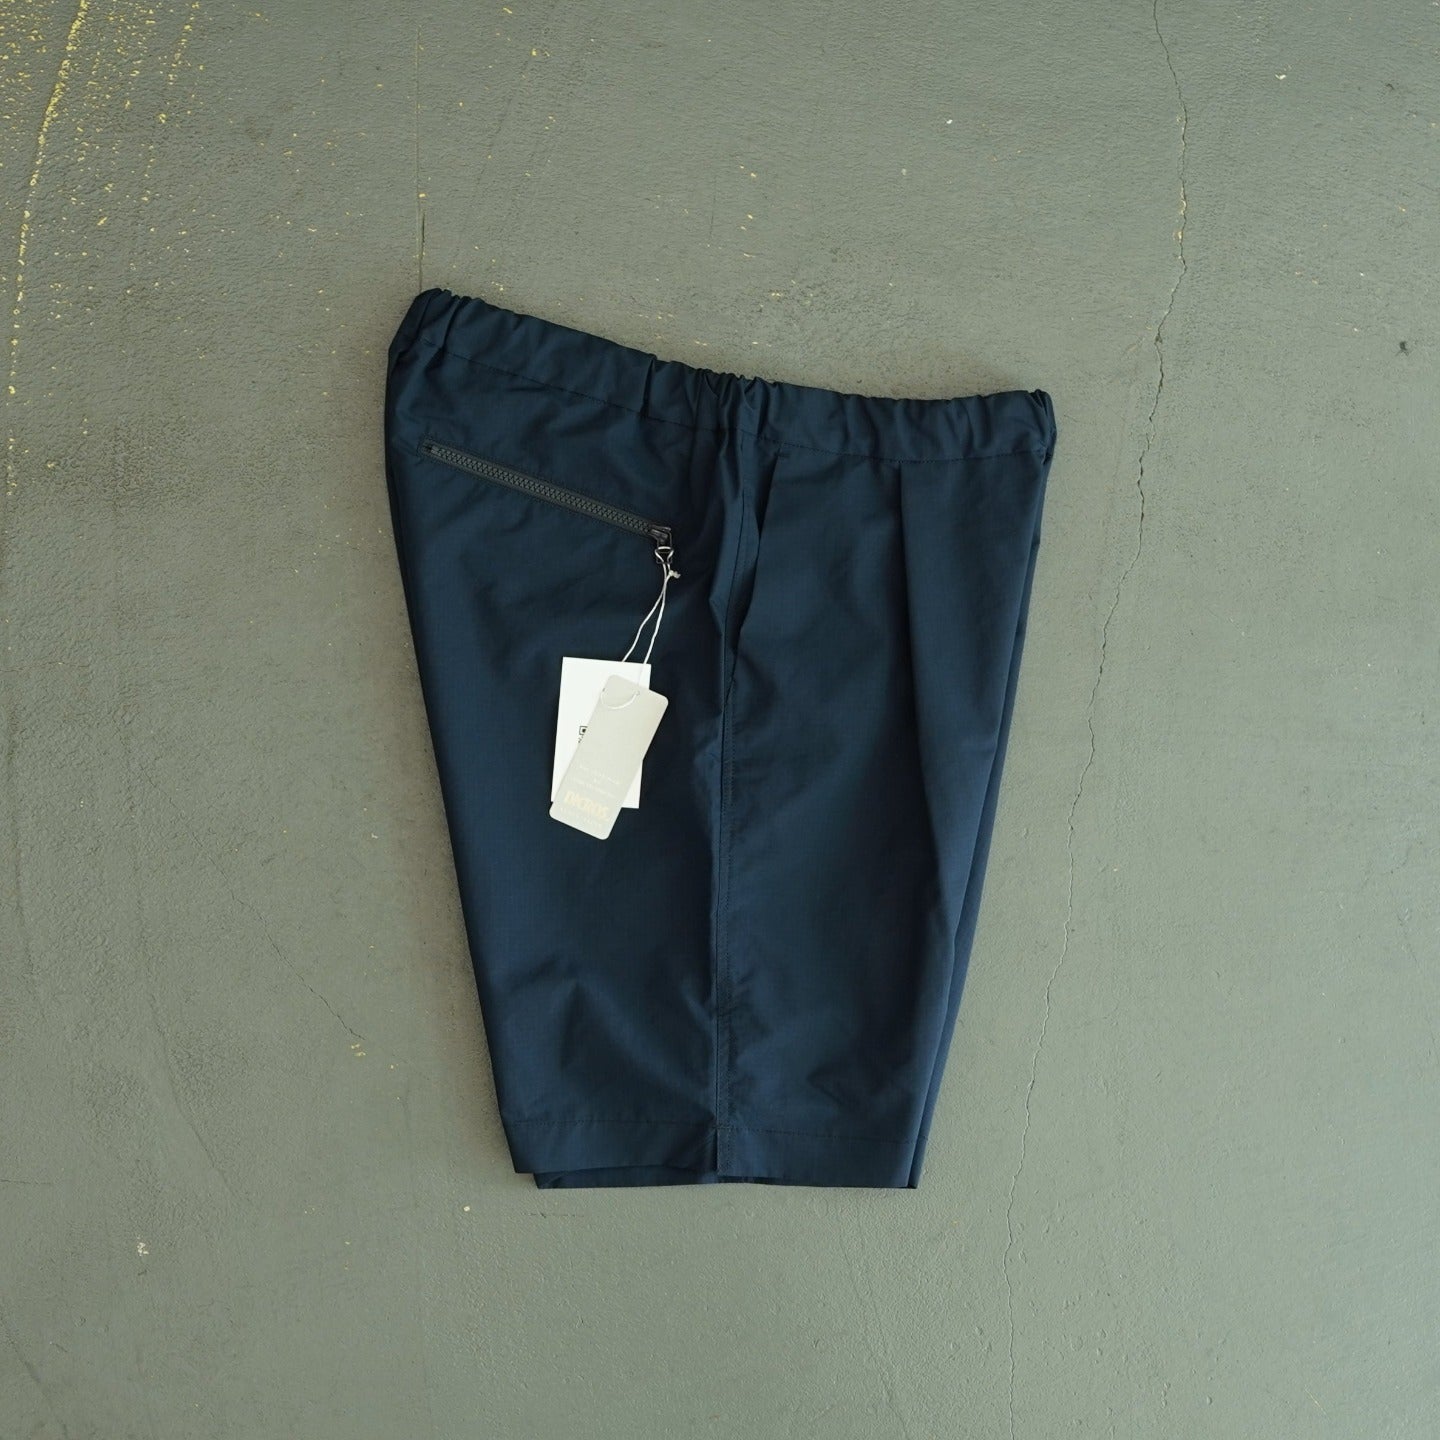 Rip Stop Track Shorts from STOCK NO: